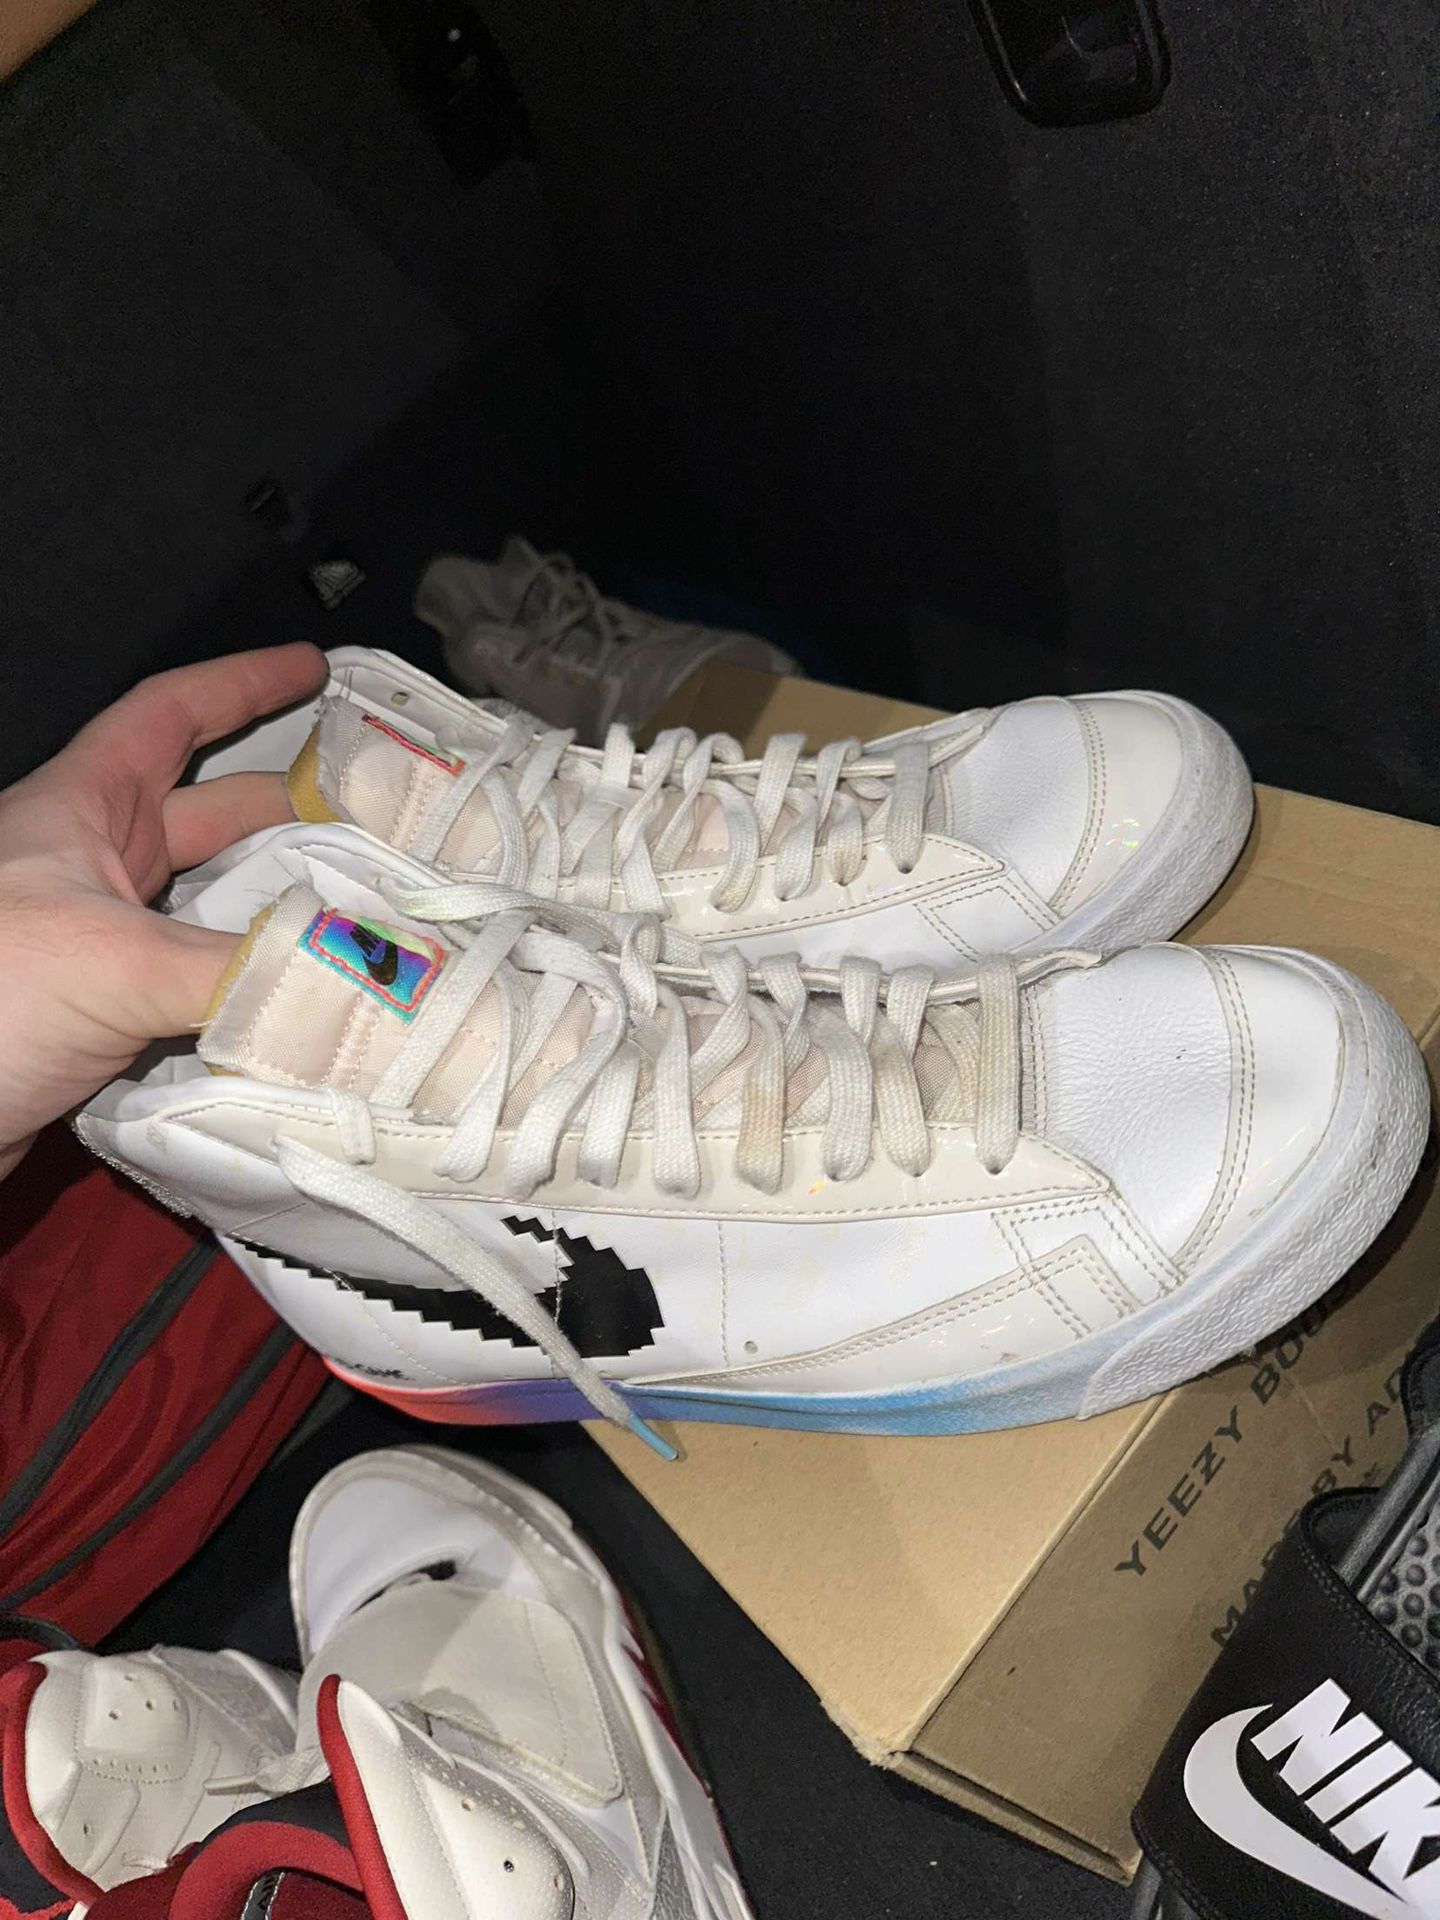 Off whites Nike Converse From Stock X Size 10